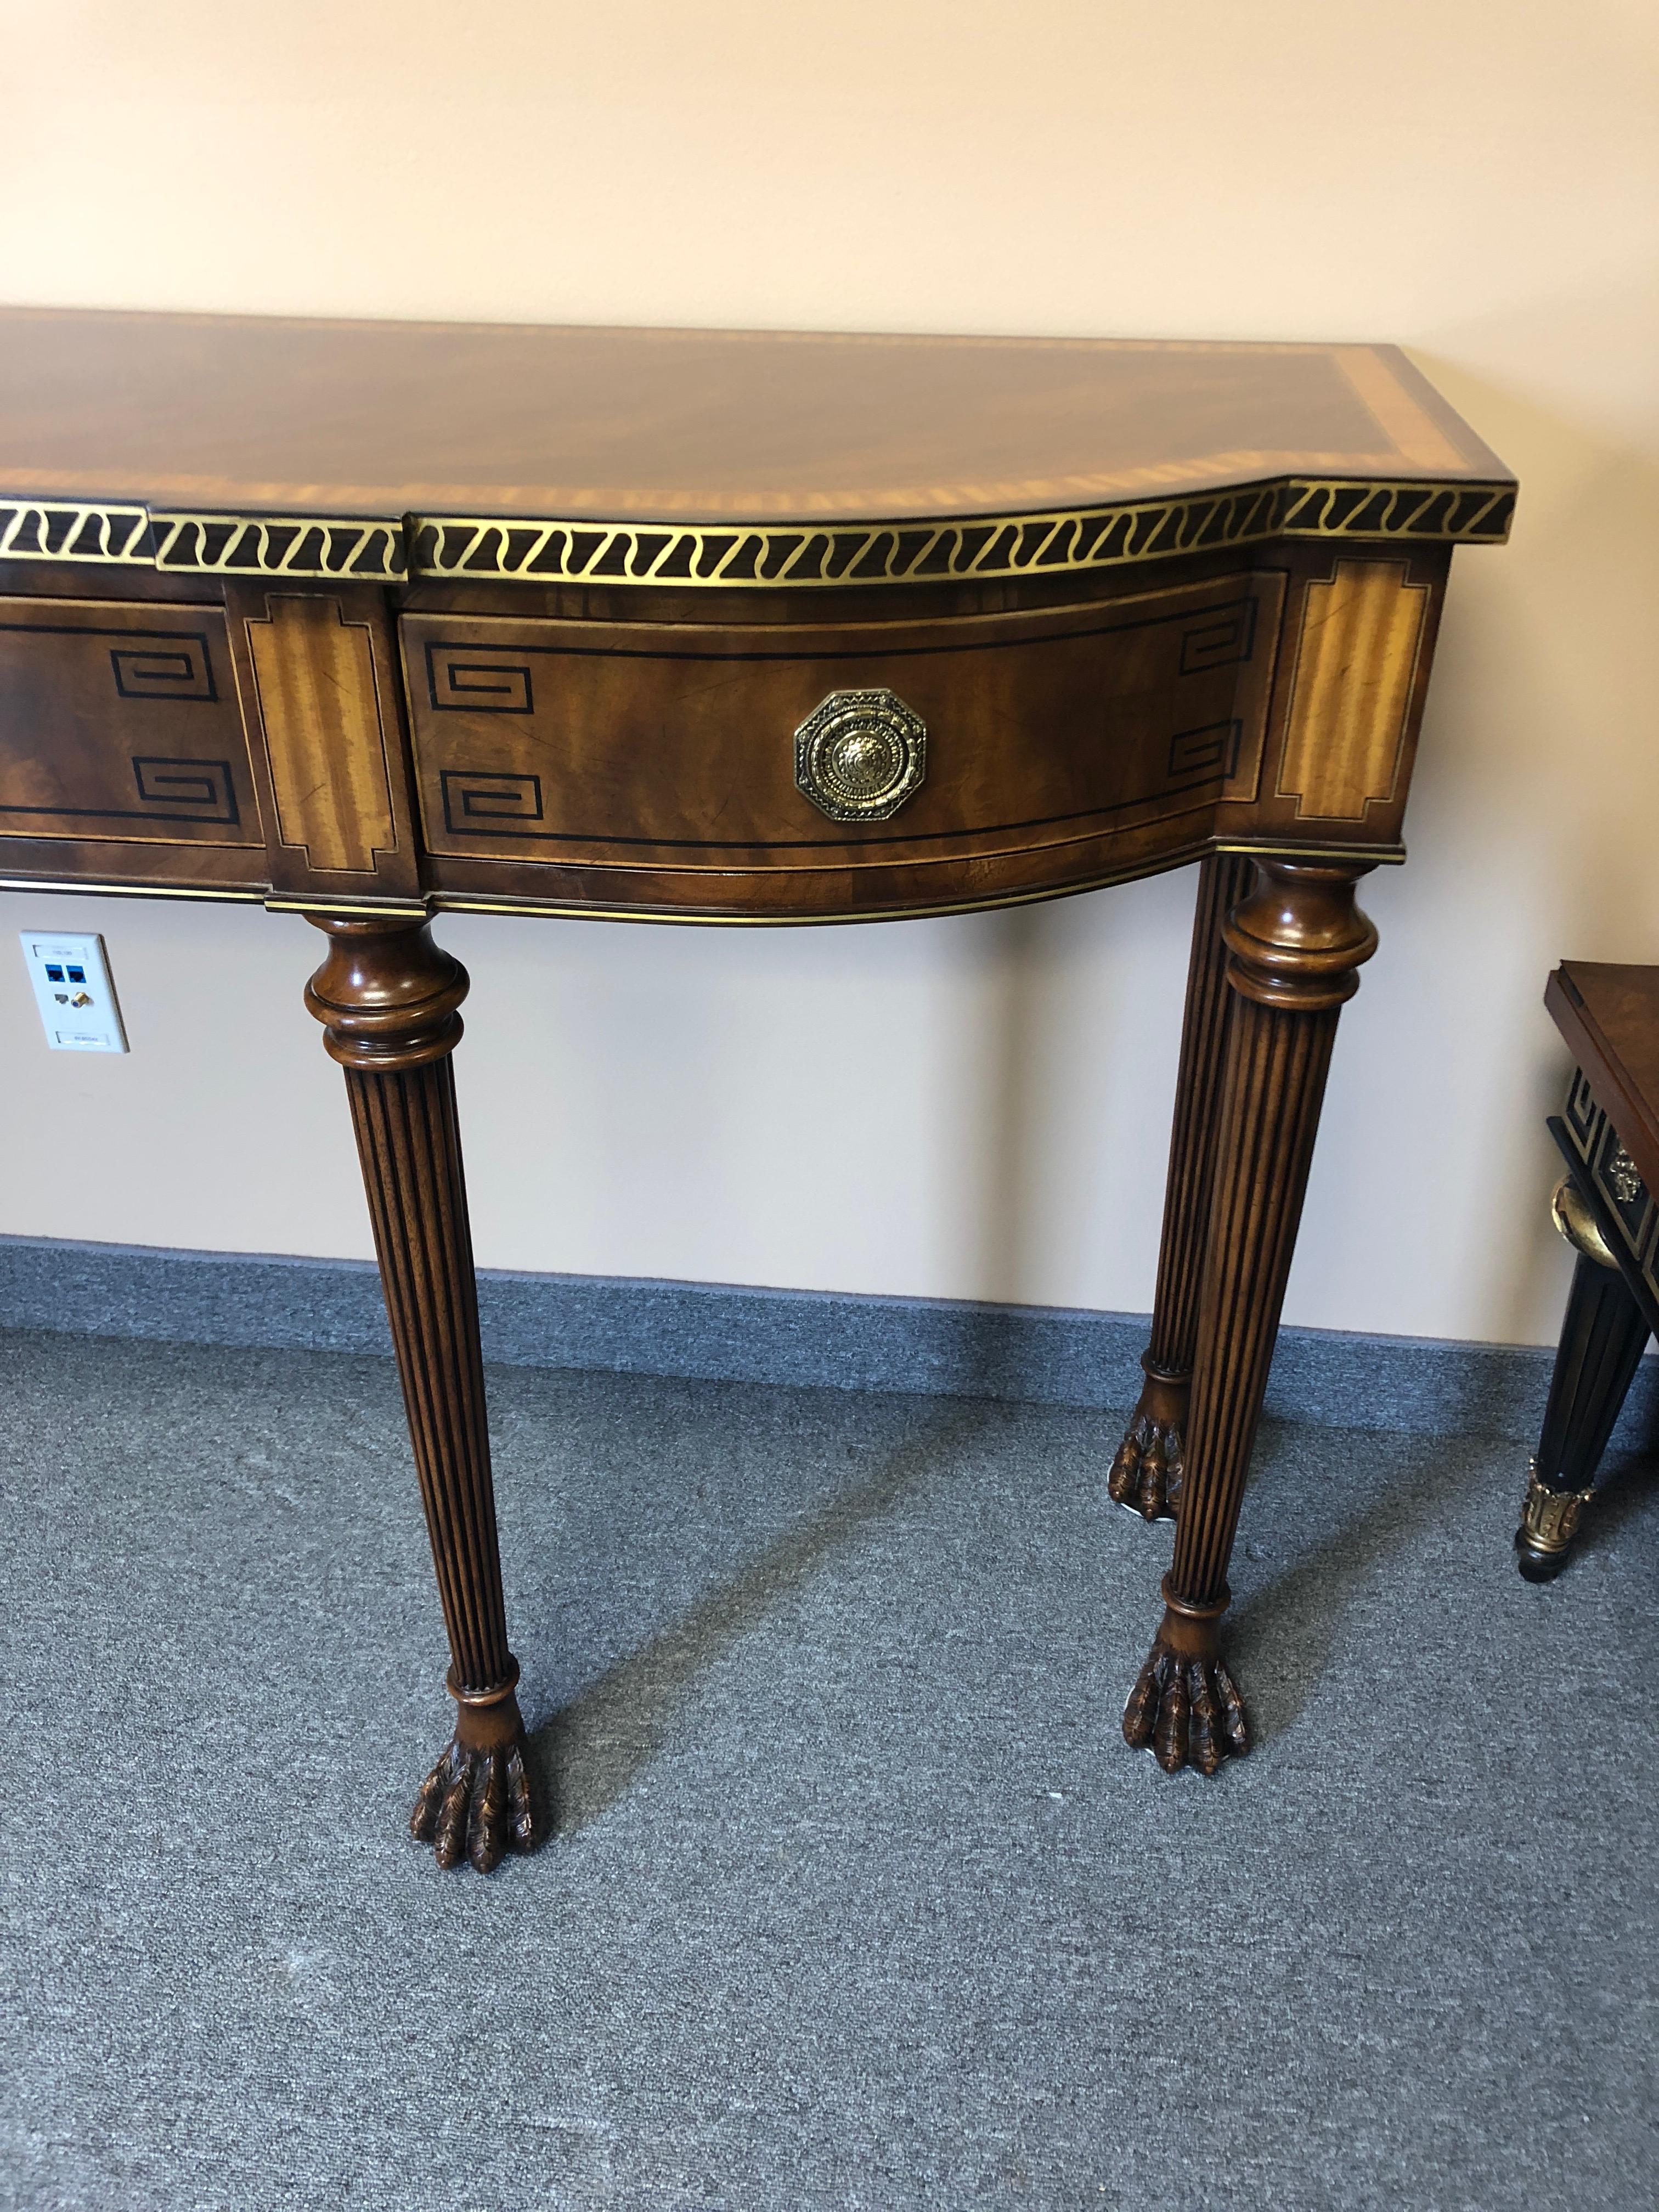 Neoclassical Magnificent Theodore Alexander Brooks Console with Brass Inlay and Greek Key